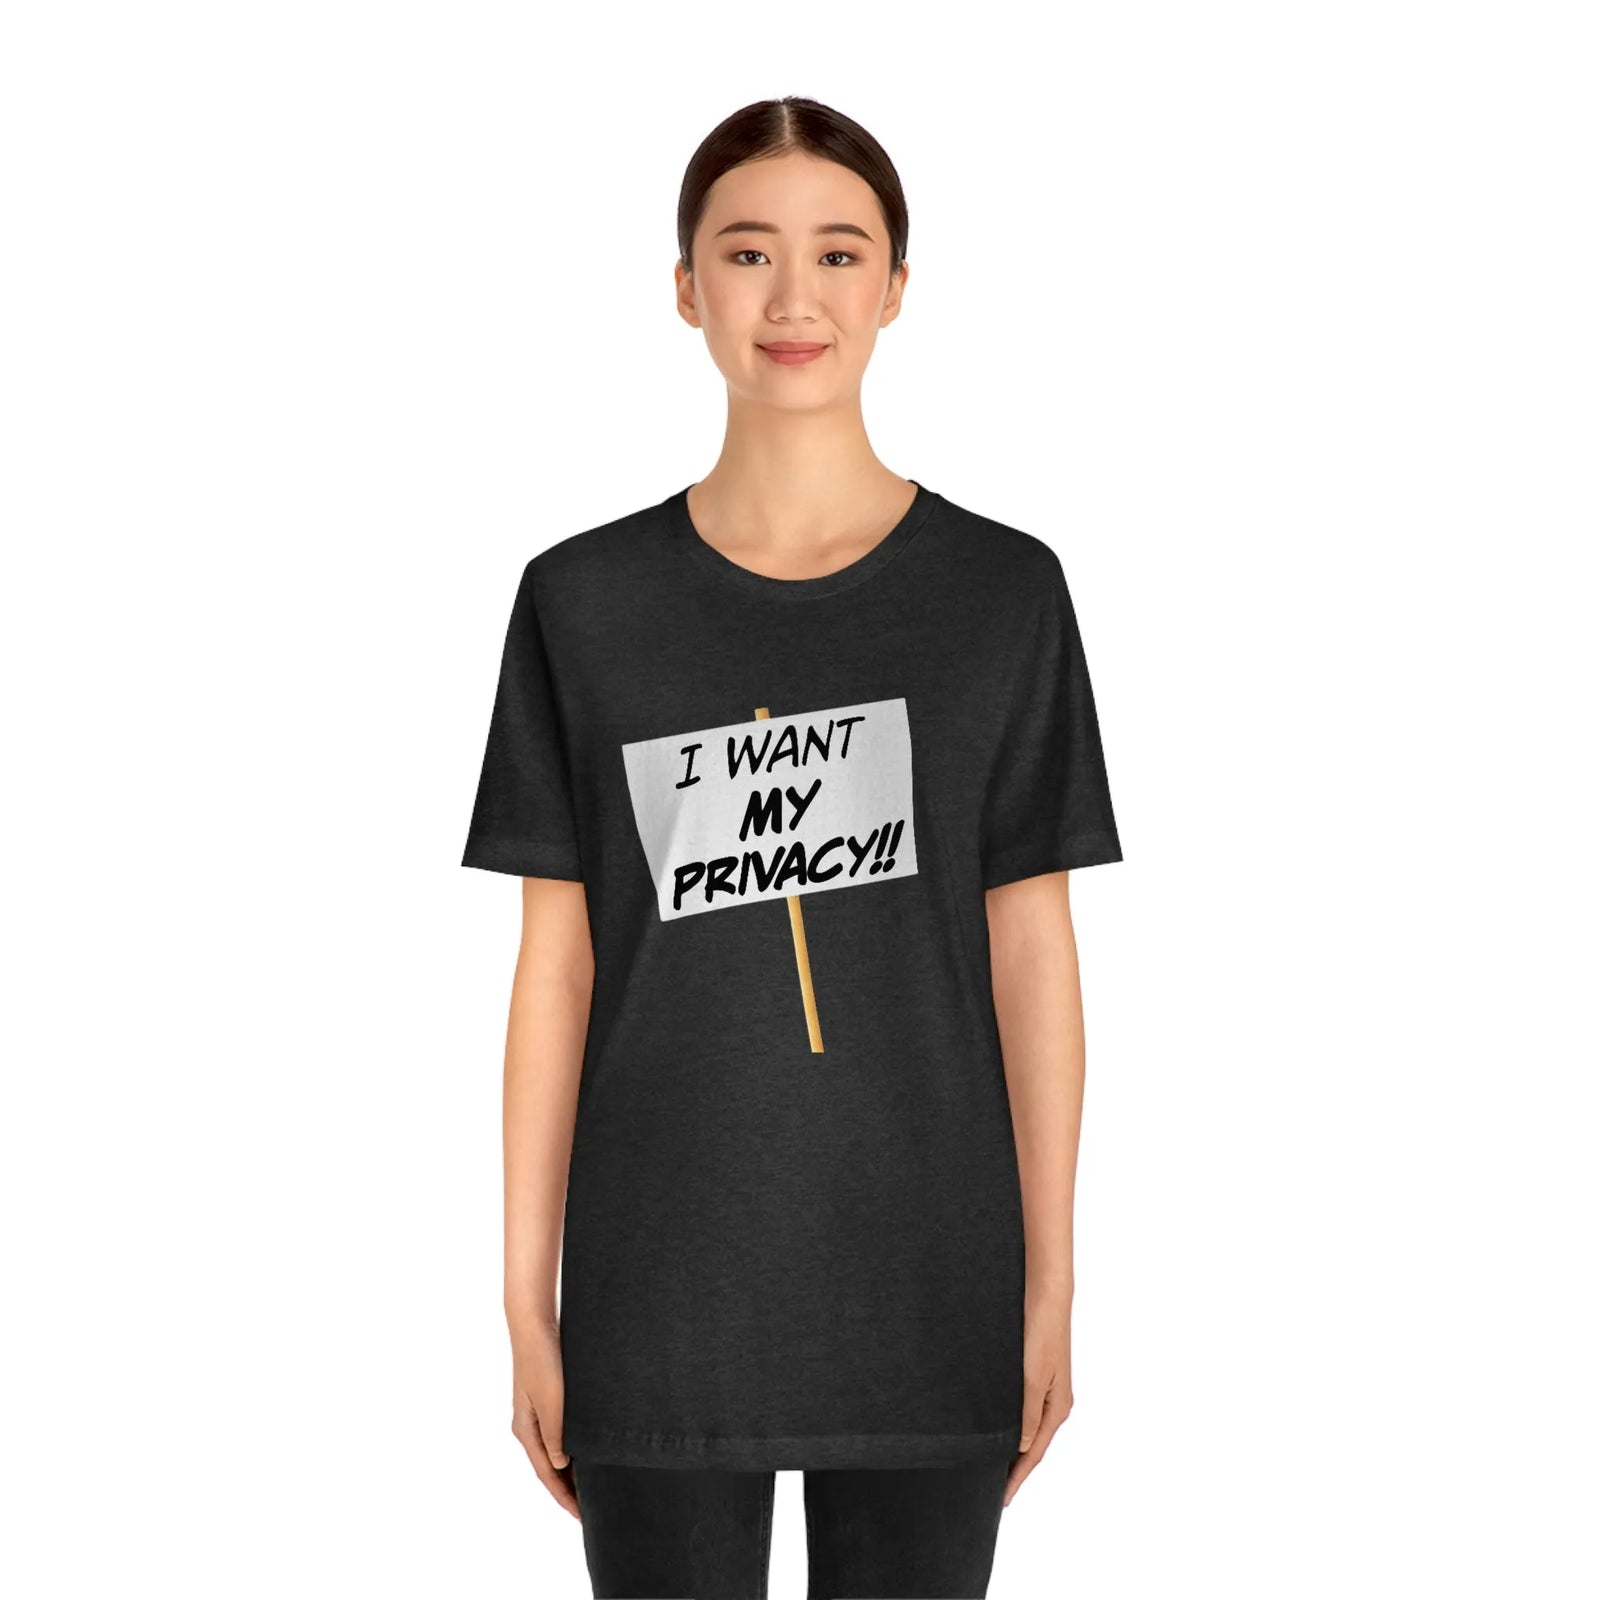 I Want My Privacy!! Unisex Jersey Short Sleeve Tee